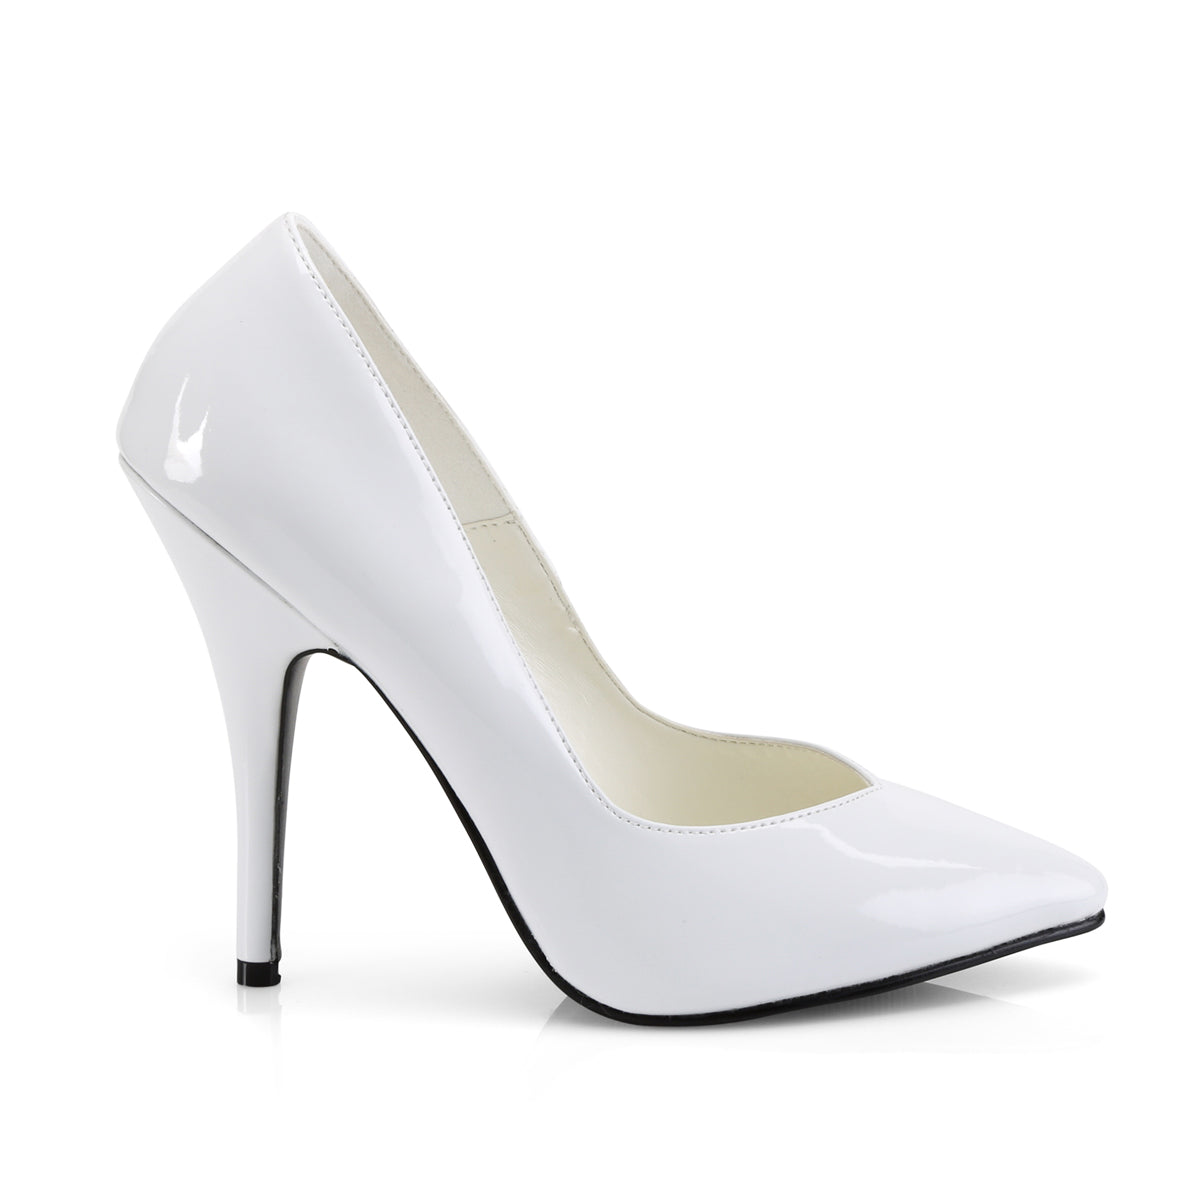 SEDUCE-420V Sexy Shoes 5" Heel White Patent Fetish Footwear-Pleaser- Sexy Shoes Fetish Heels